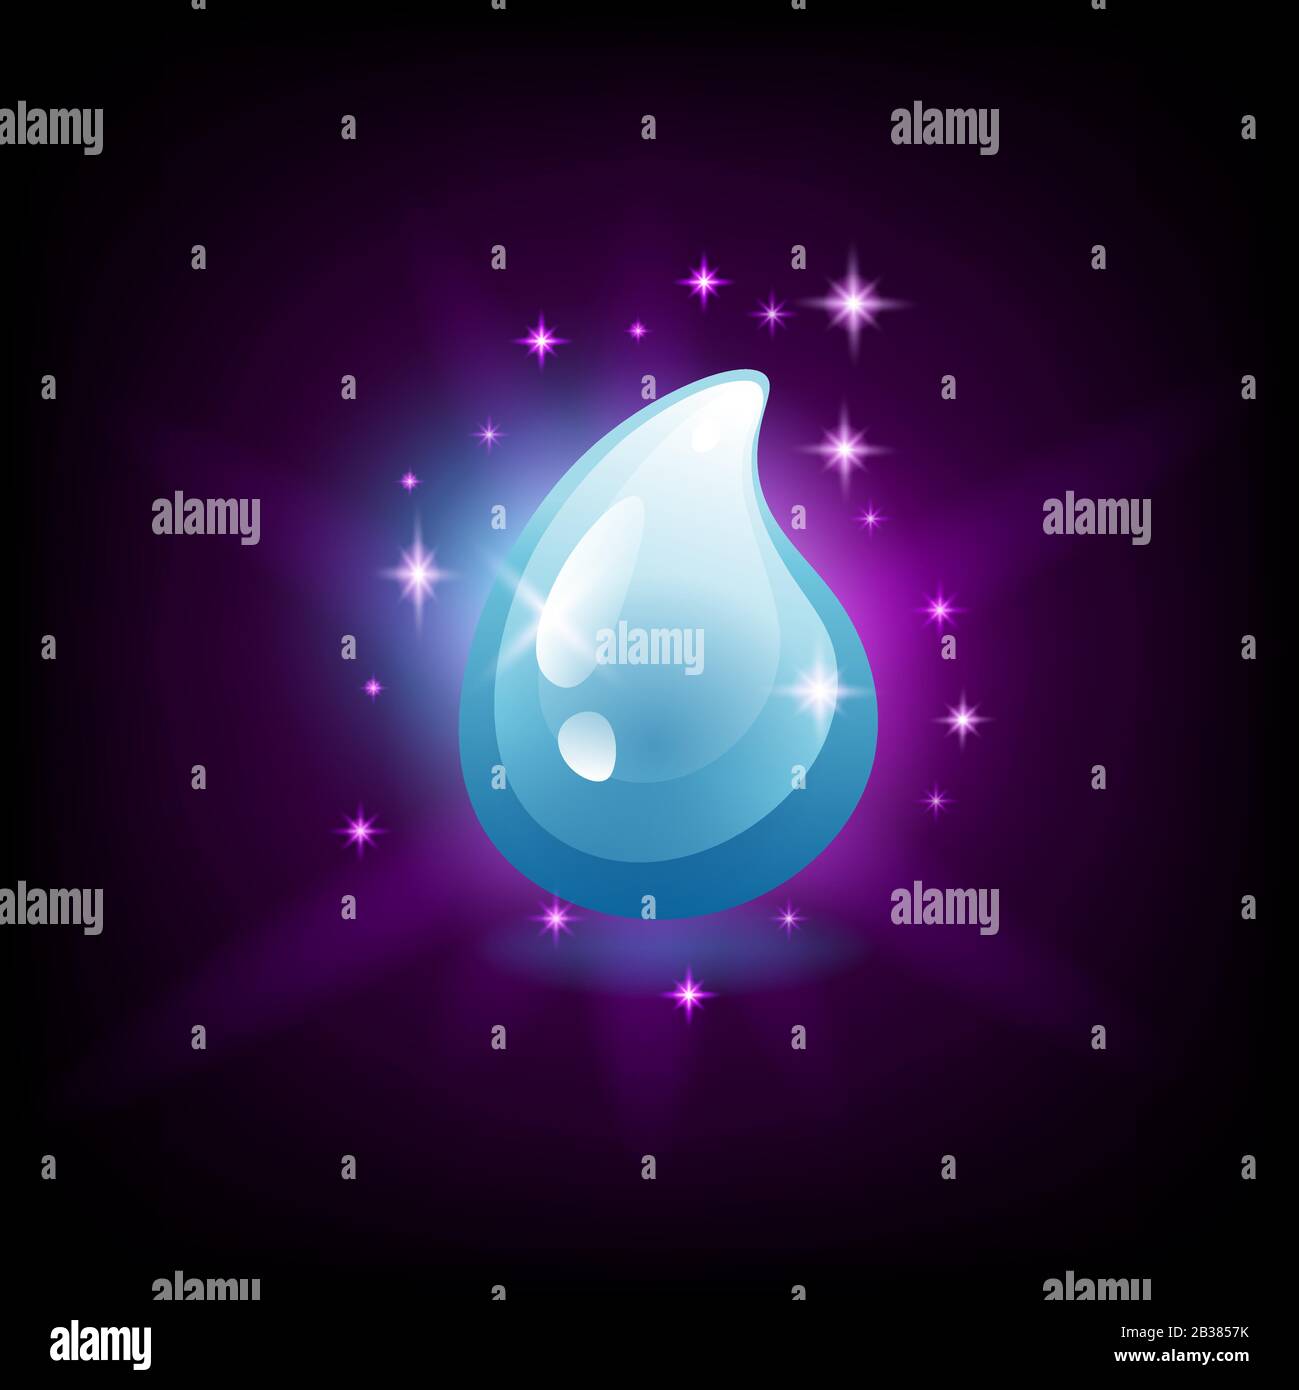 Shiny blue water drop icon for slot machine, game design element, vector illustration on dark background with sparkles. Stock Vector